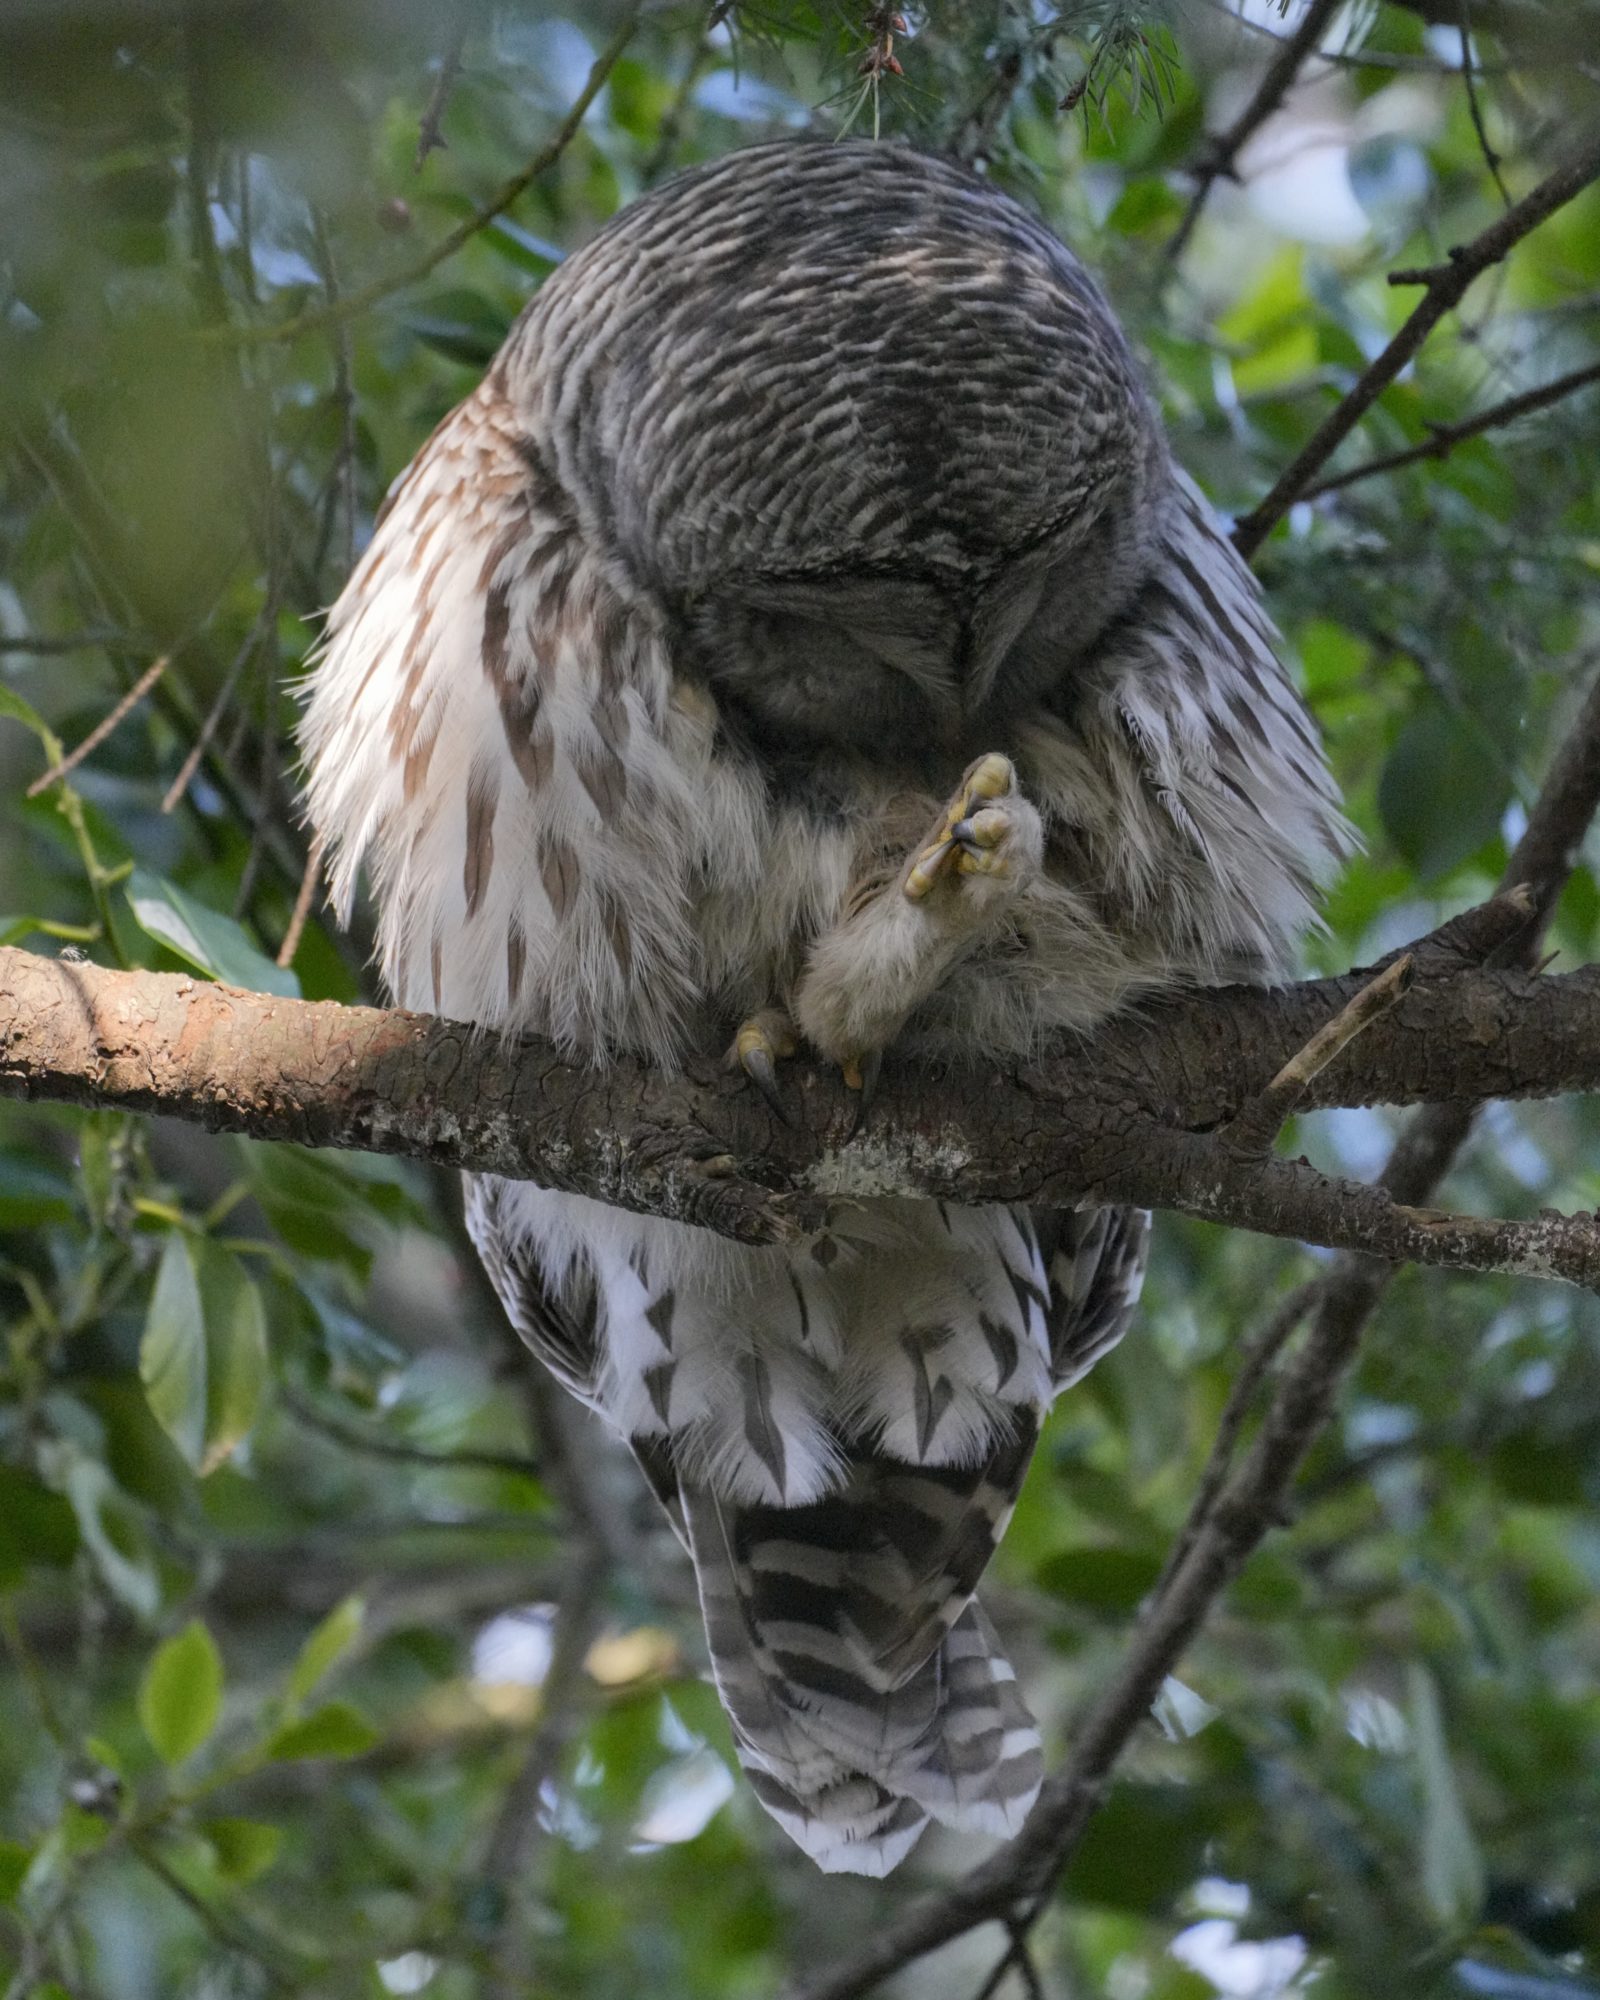 A Barred Owl is up in a tree, preening its chest and holding out one foot for some reason